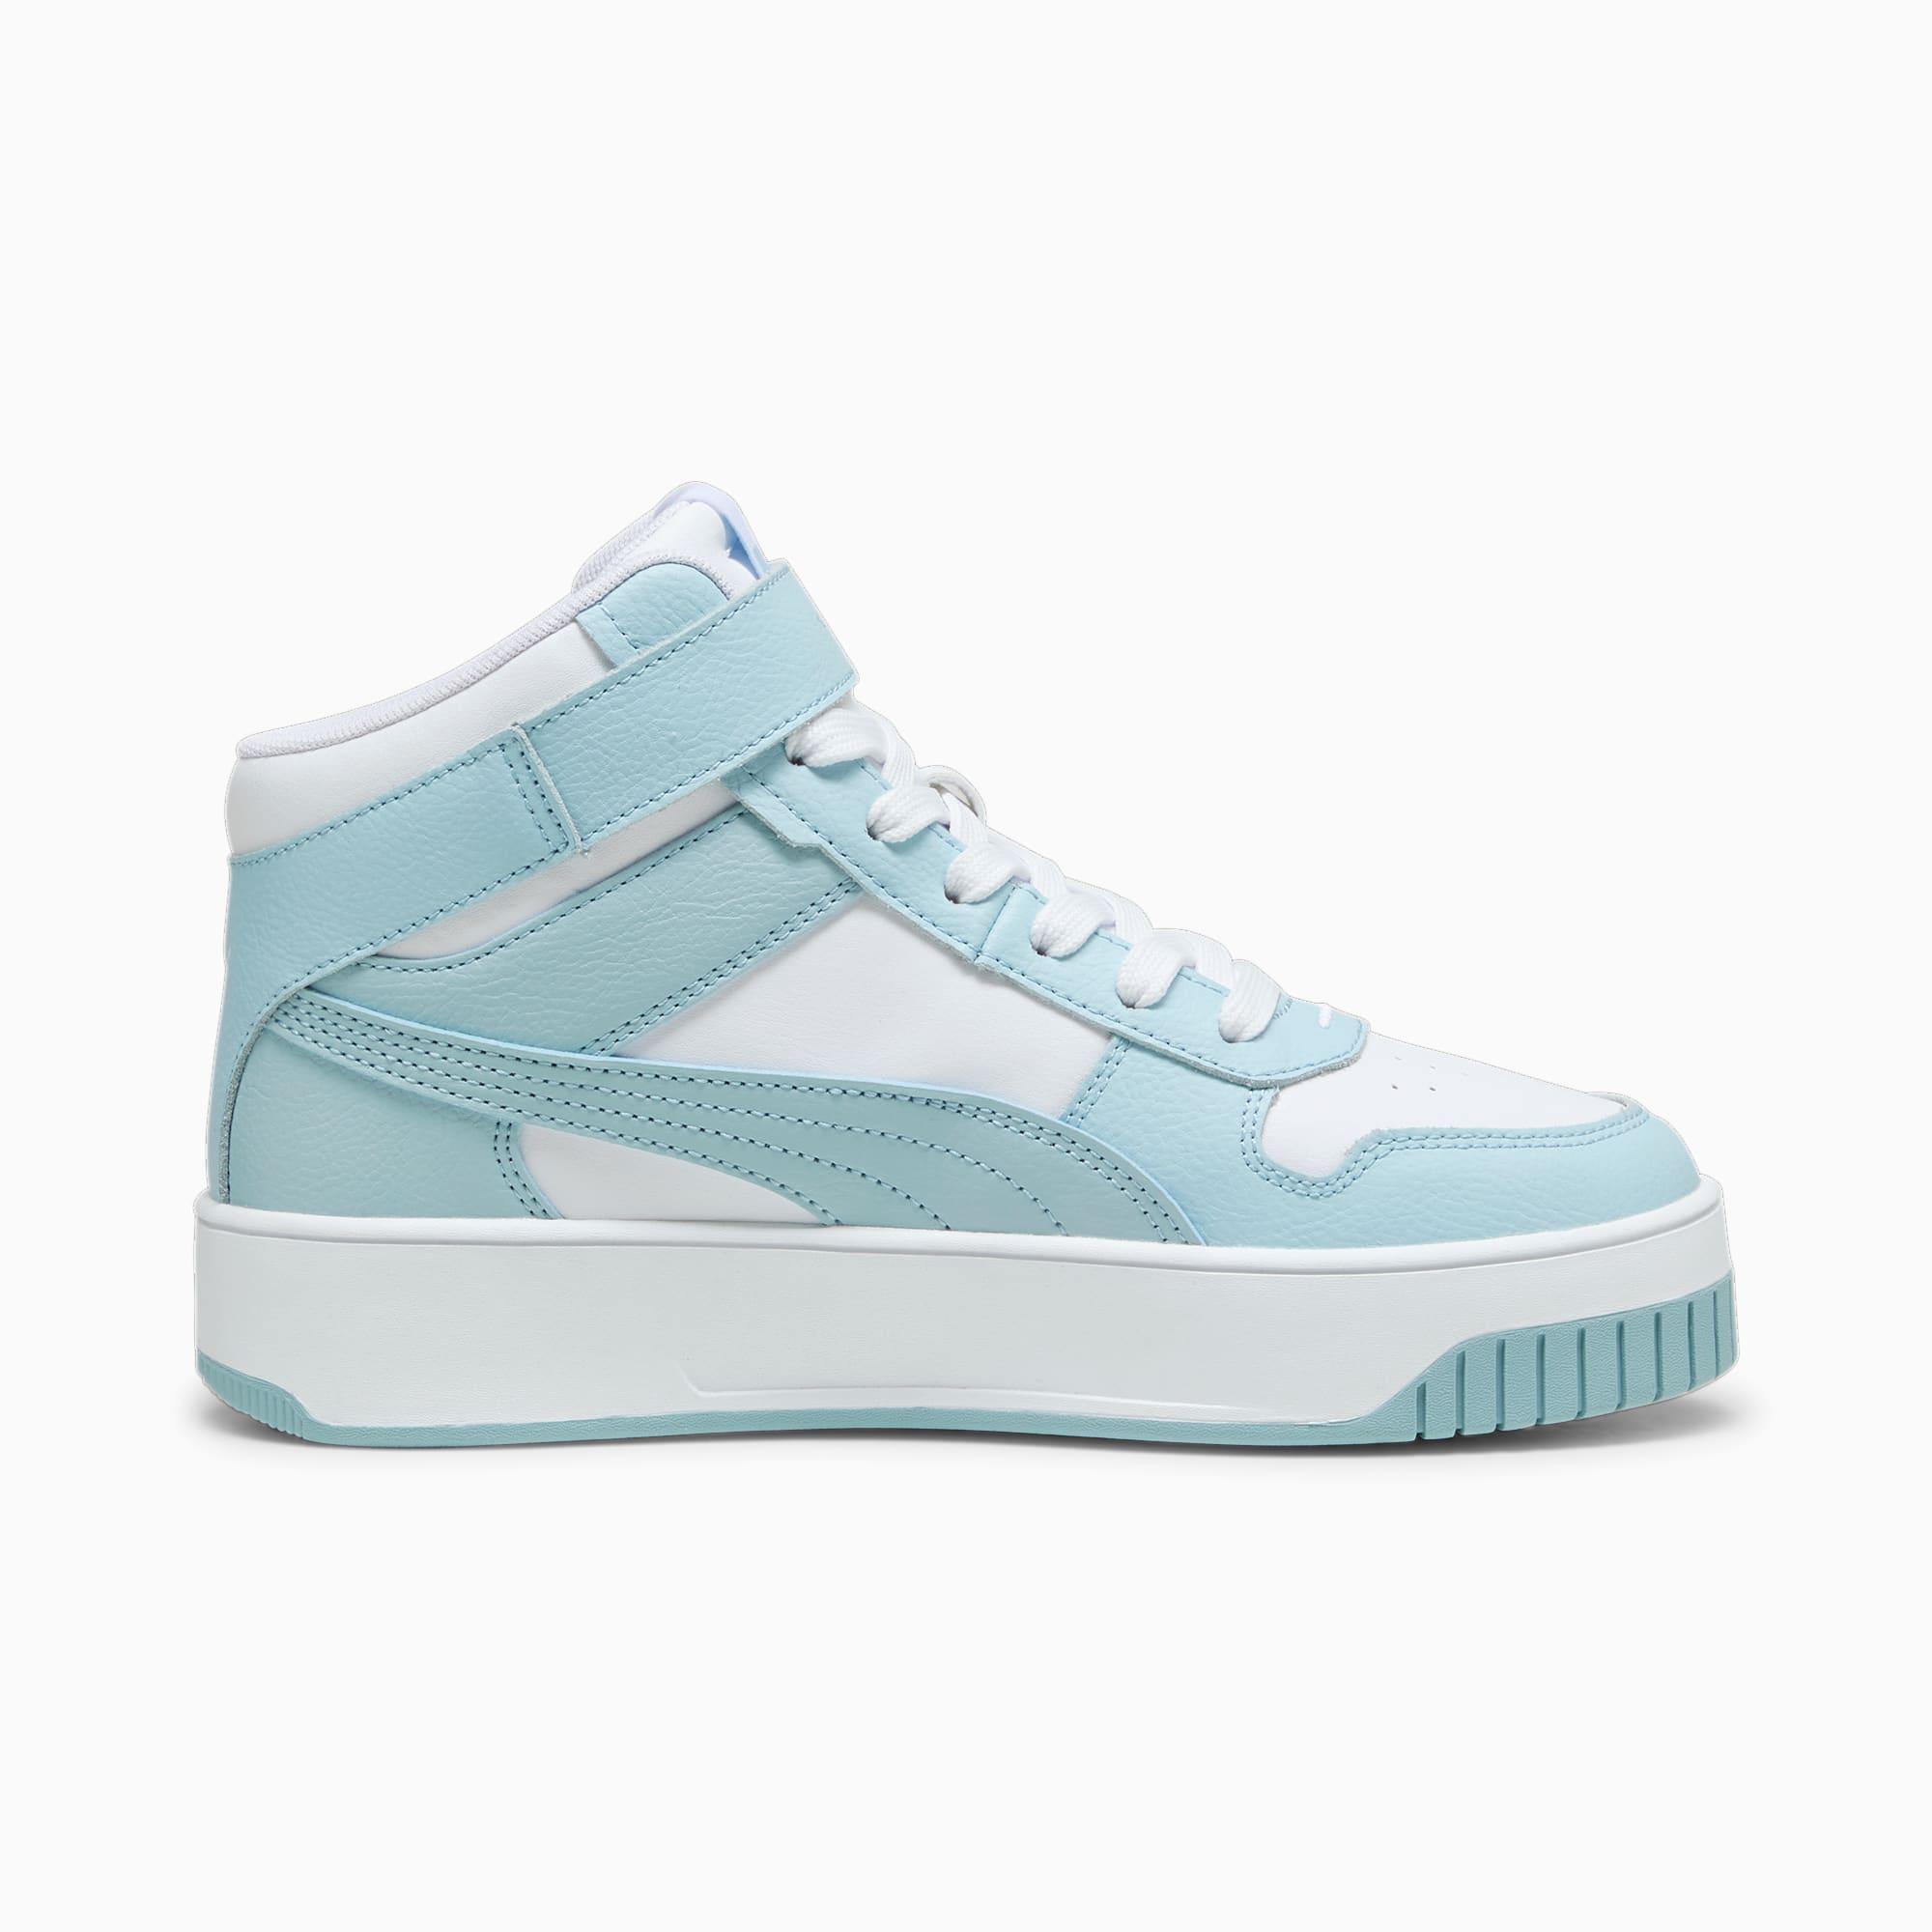 PUMA Carina Street Mid Women's Sneakers, White/Turquoise Surf, Size 37,5, Shoes